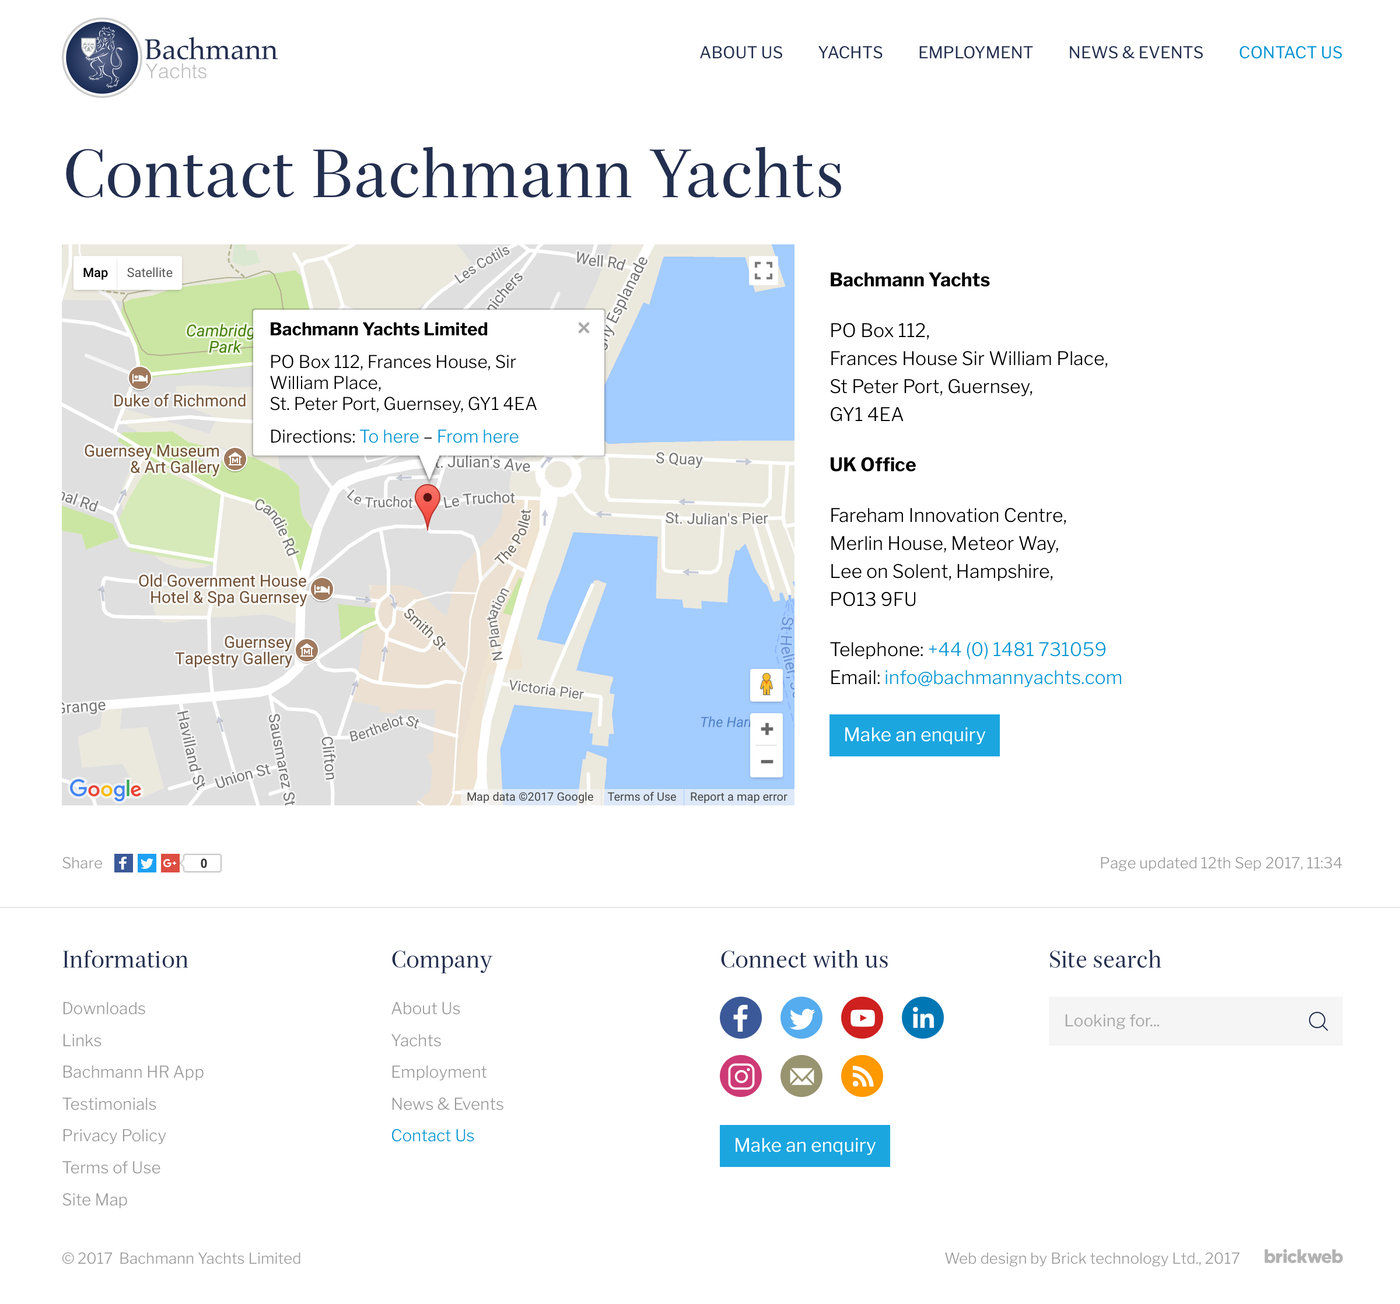 Bachmann Yachts Contact us